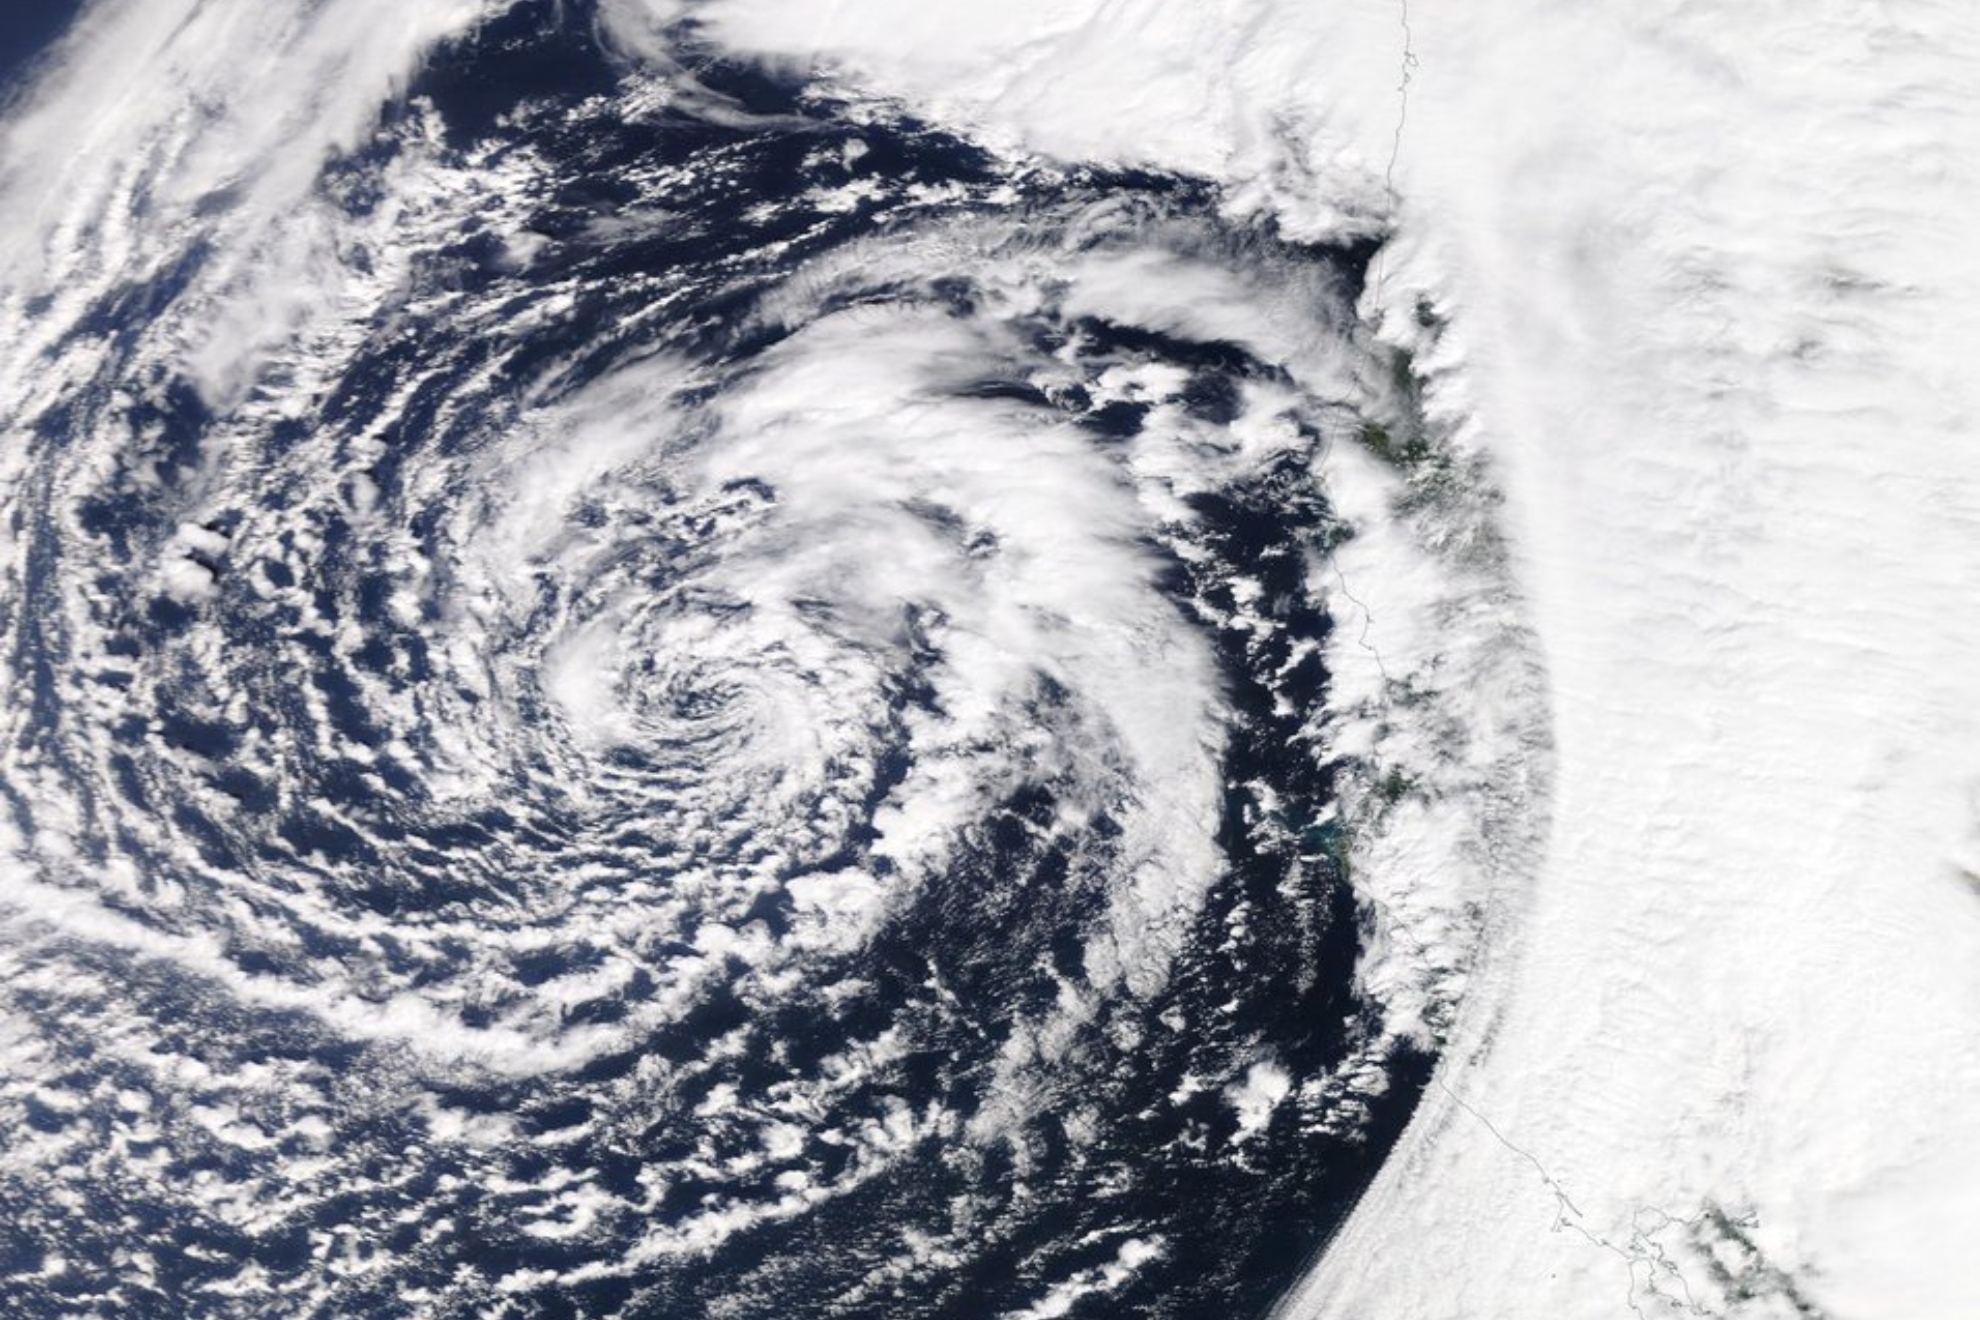 Image of the bomb cyclone about to hit California